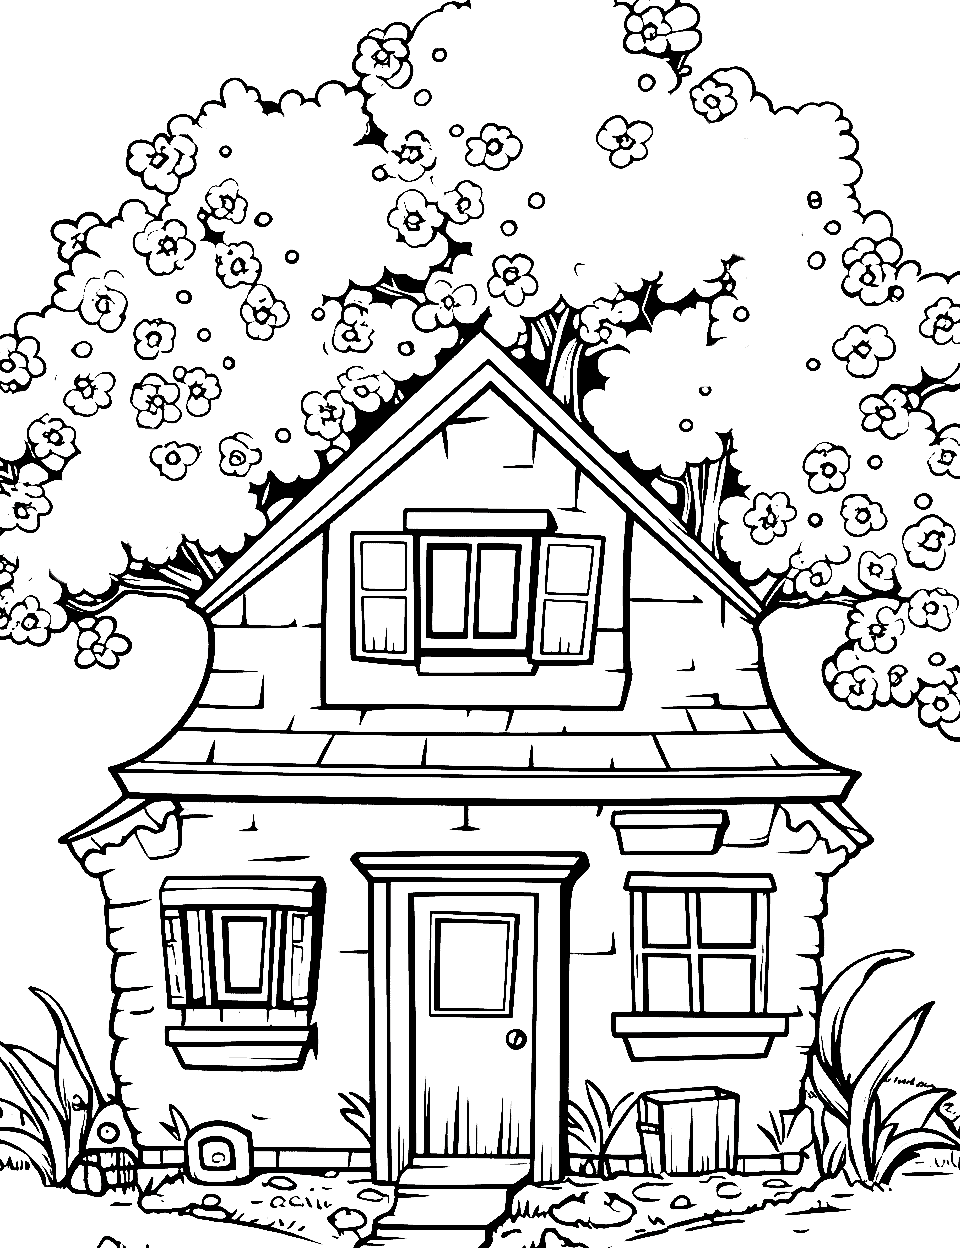 Blossoming Cherry Tree Home Coloring Page - A house under a cherry tree in full bloom.